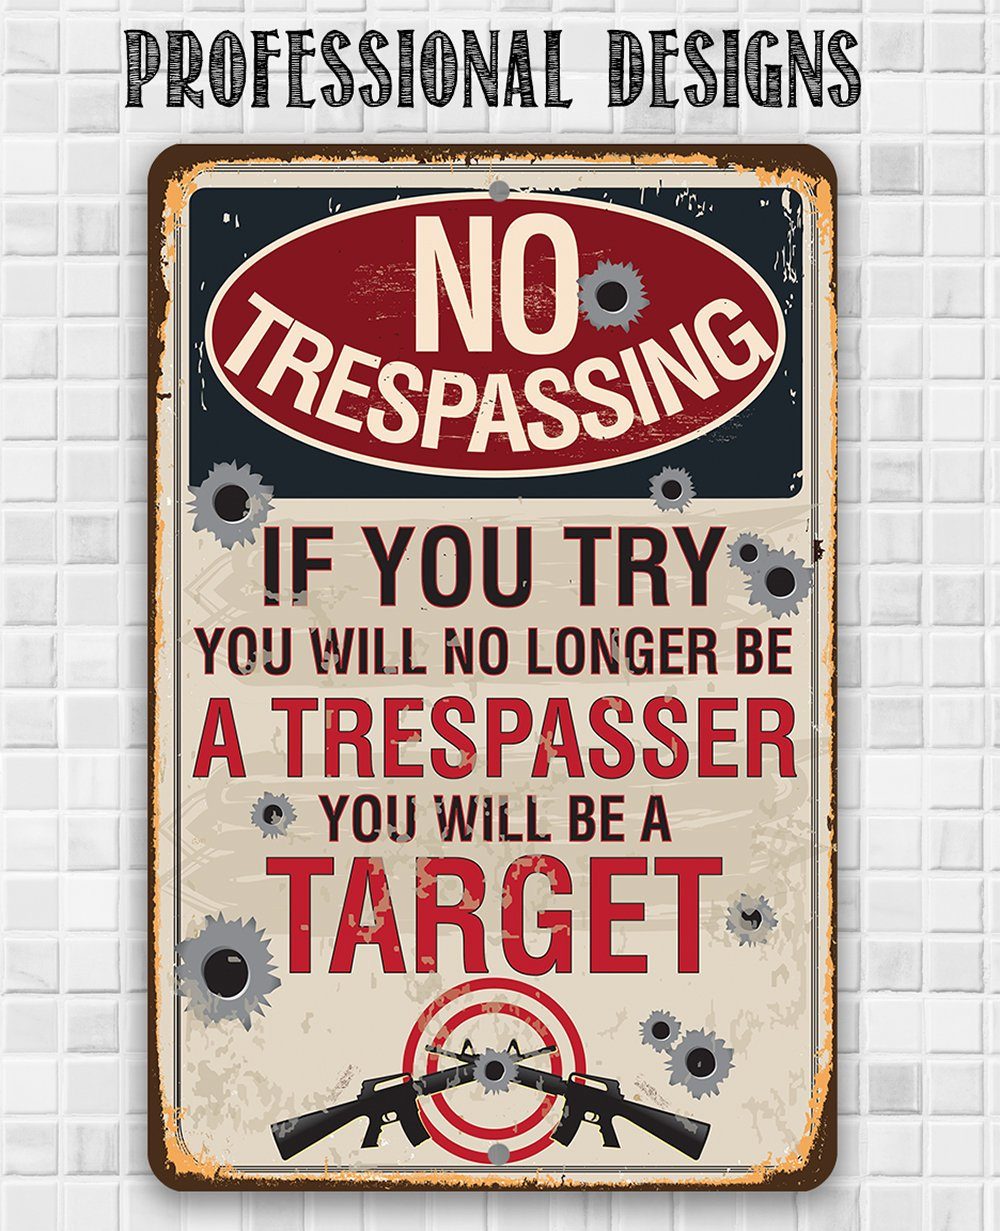 No Trespassing If You Try - Metal Sign | Lone Star Art.